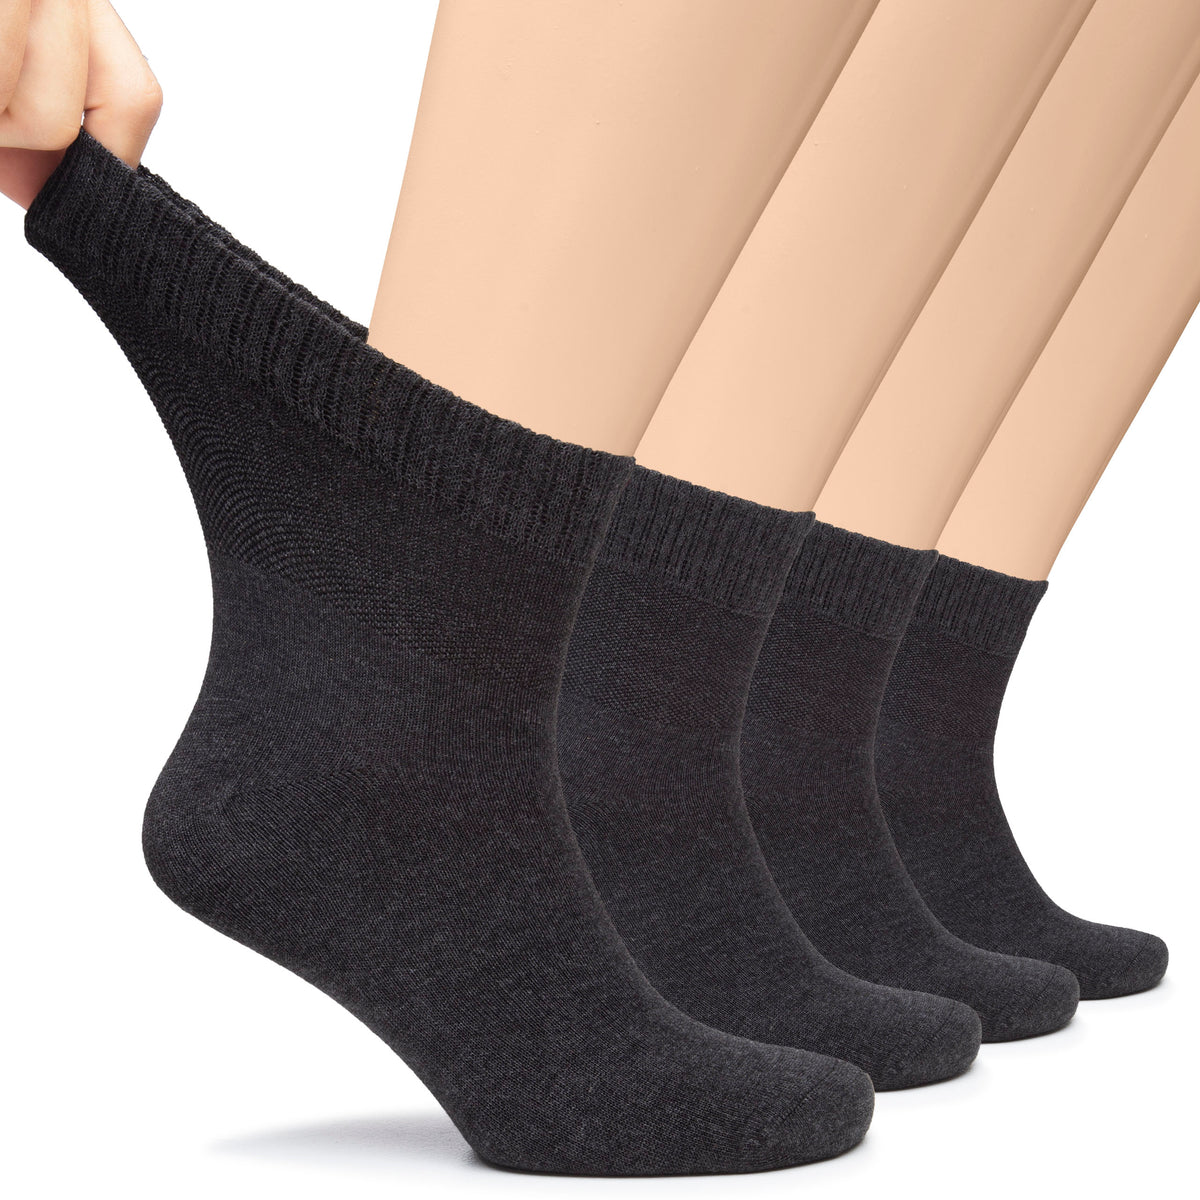 This image depicts a man's feet adorned in black socks made of Men's Bamboo Diabetic Socks, designed to provide comfort and support for those with diabetes.